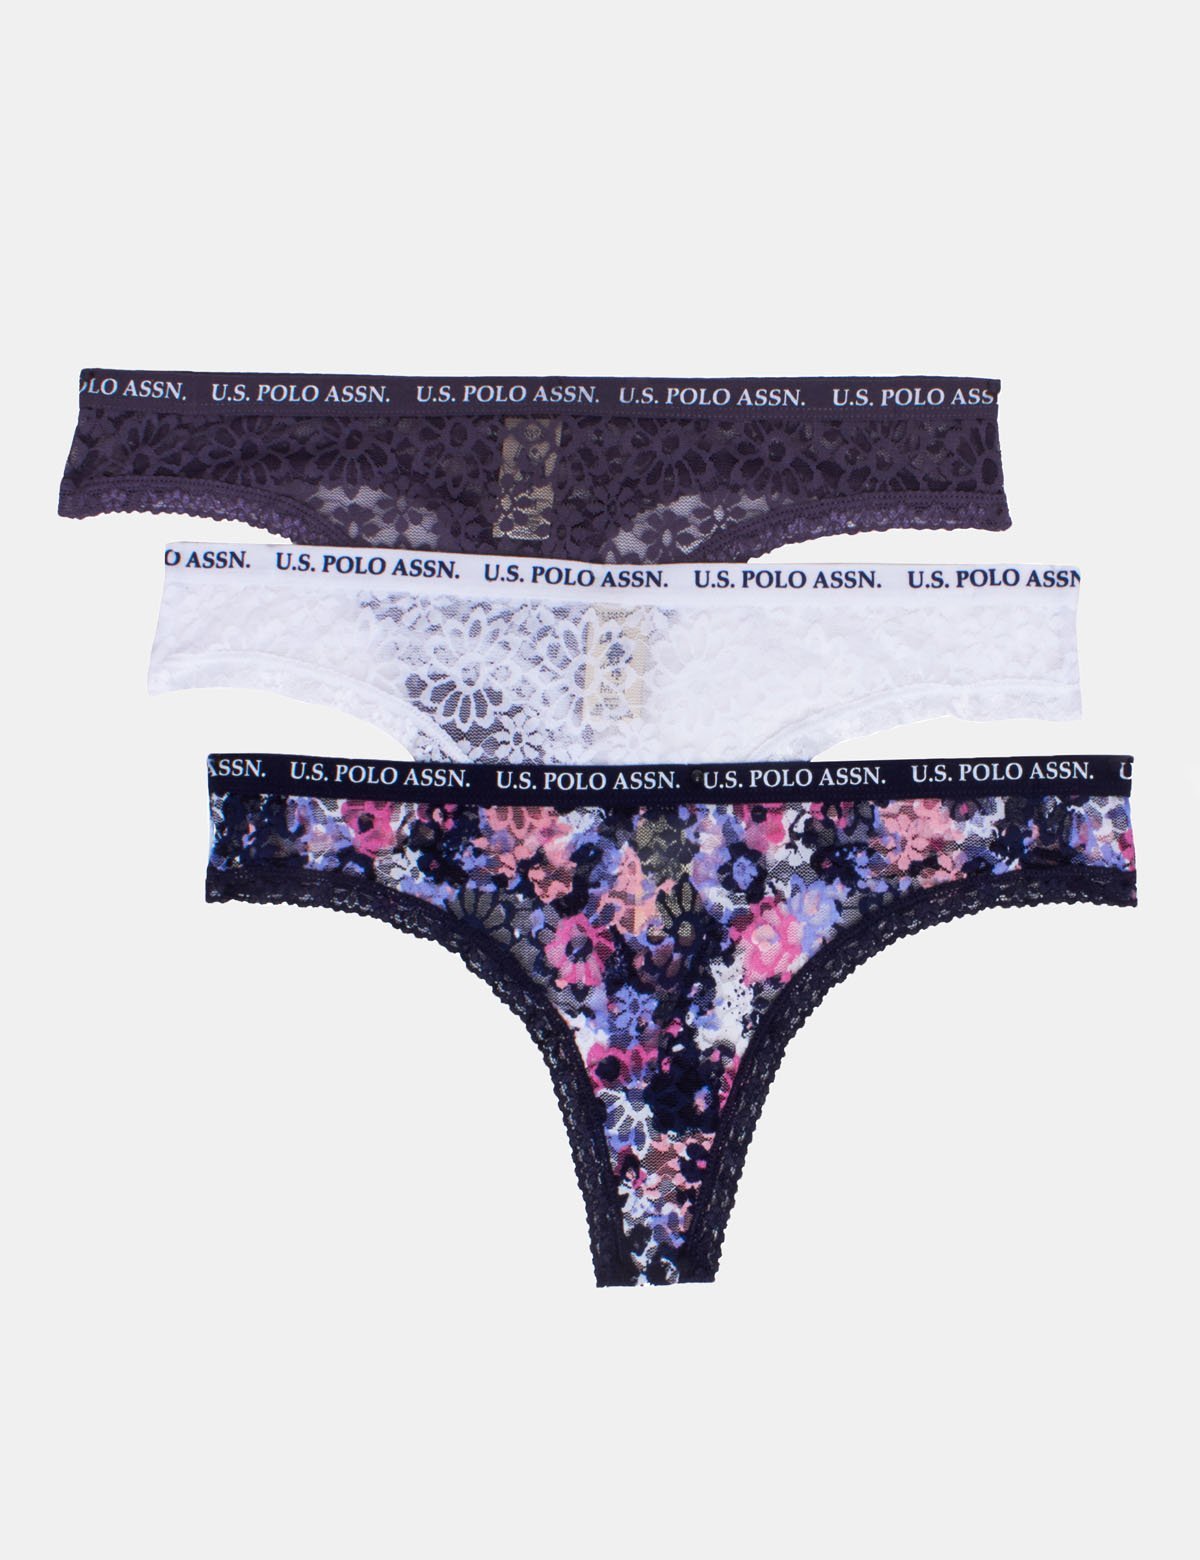 Buy U.S. Polo Assn. Womens 3 Pack Hi-Cut Lace Trimmed Panties with Elastic  Waistband Grey, Black, White Small at